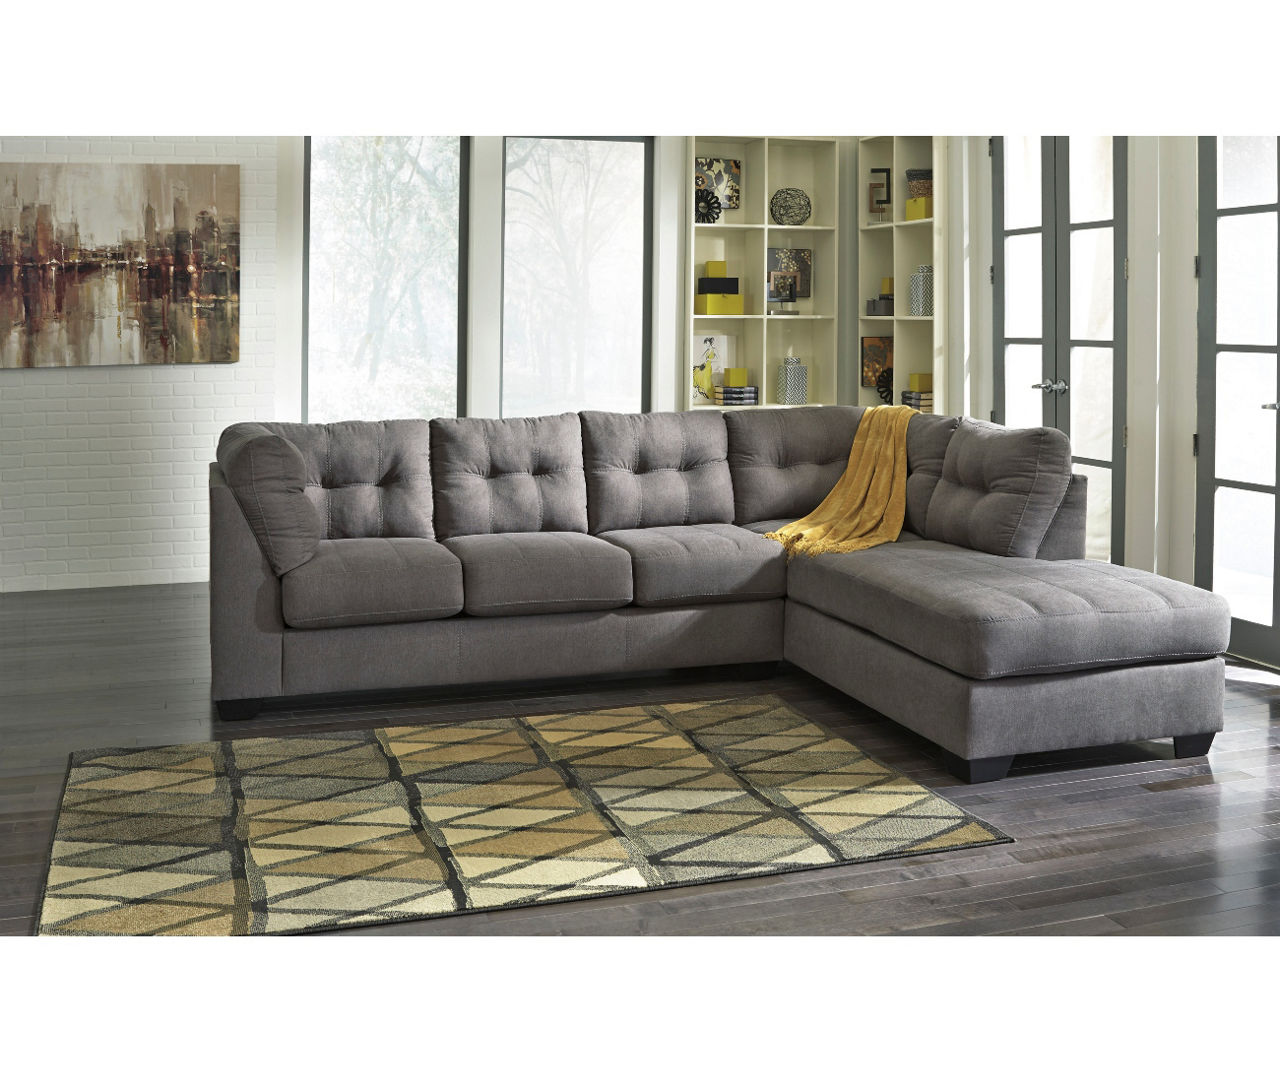 Signature Design By Ashley Maier Charcoal Full Sleeper Sectional with Right-Facing Chaise